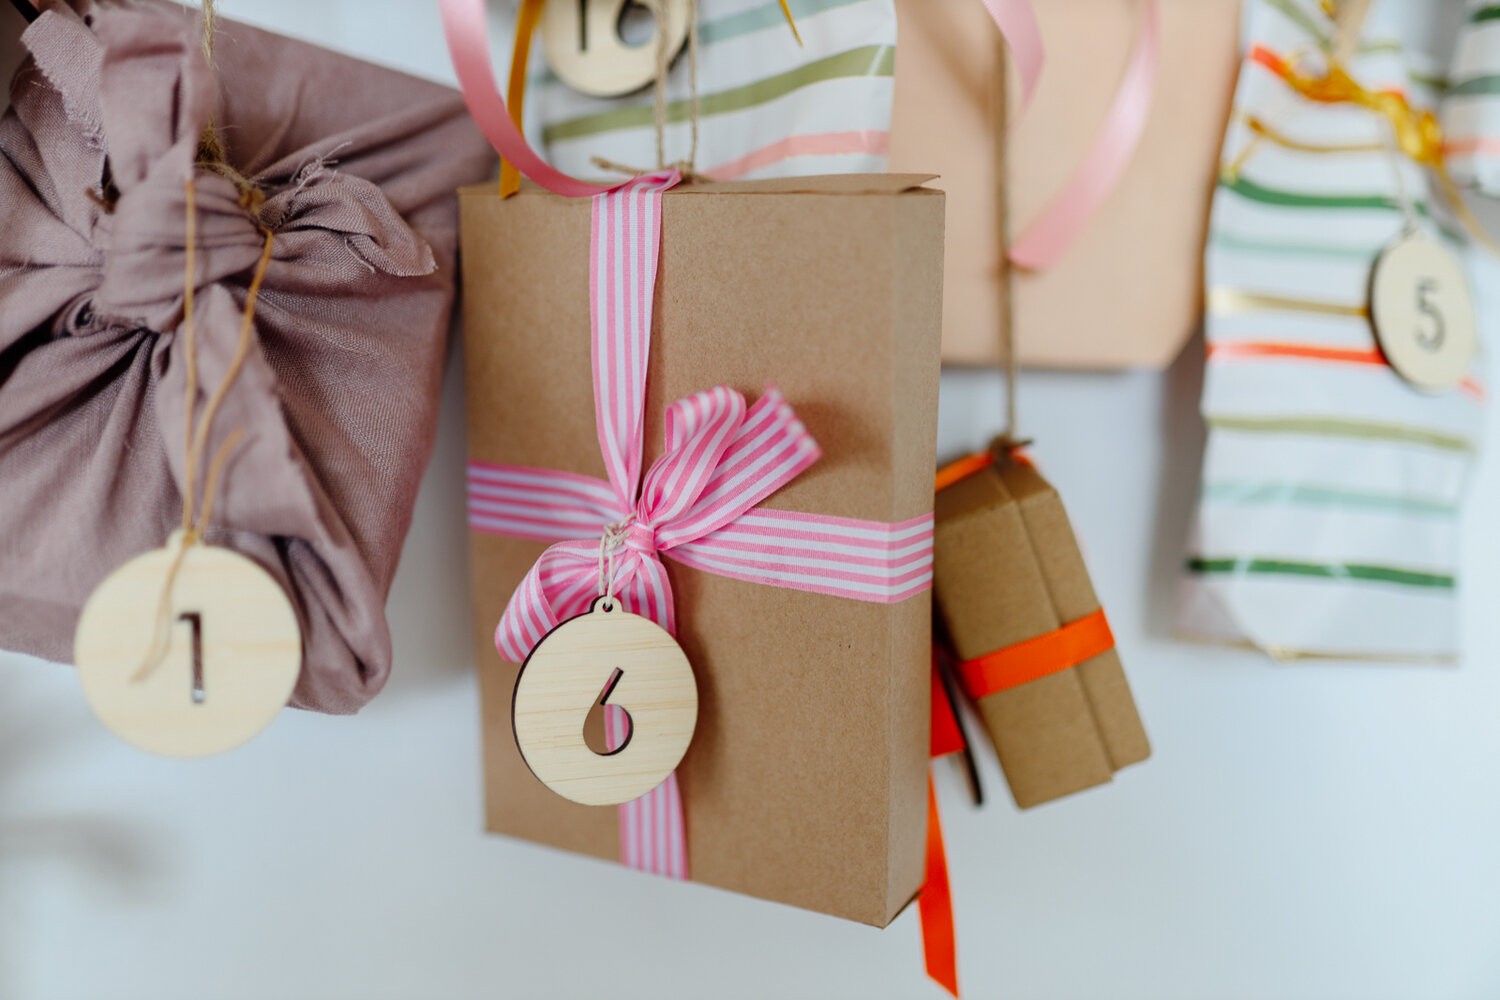 Cardboard boxes hang on a wall with numbered baubles and beautifully ribbon wrapped around them.